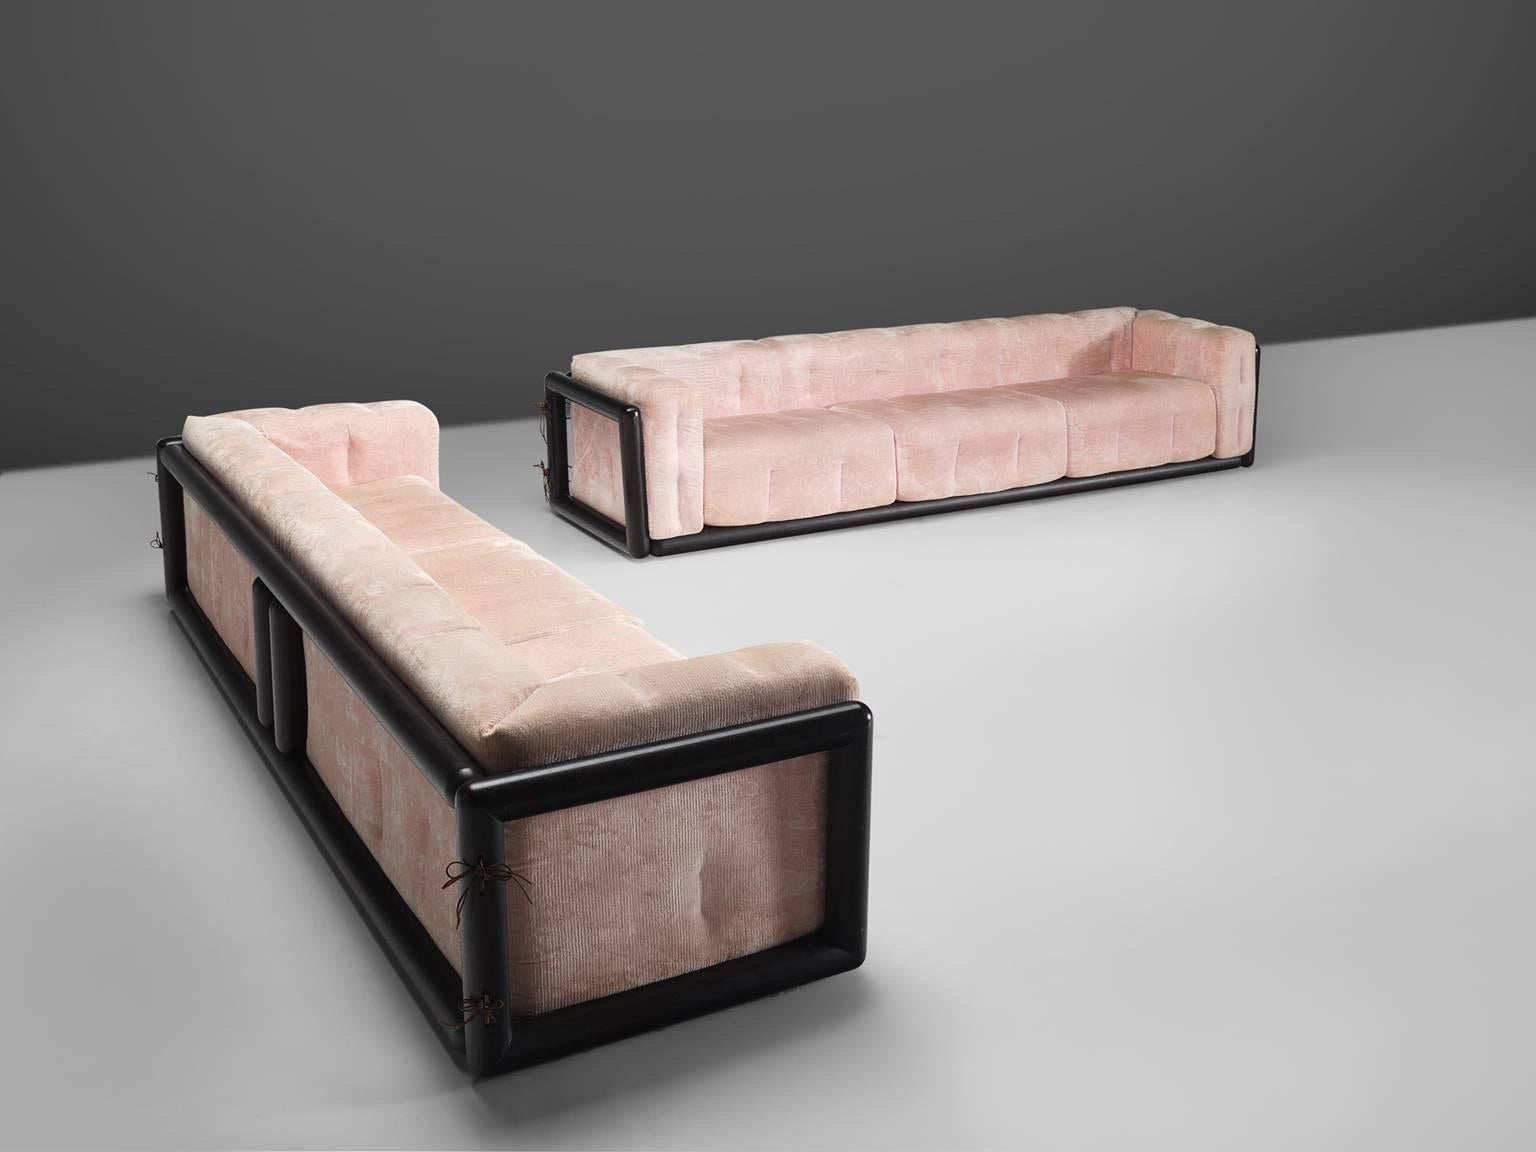 Carlo Scarpa for Simon, 'Cornaro' sofa, pink velvet fabric, wood, Italy, 1973

The sofa has a very thick cushion and is upholstered with the original pink fabric. The sofa has a relatively thin back and armrests. The frame is made out of a thick